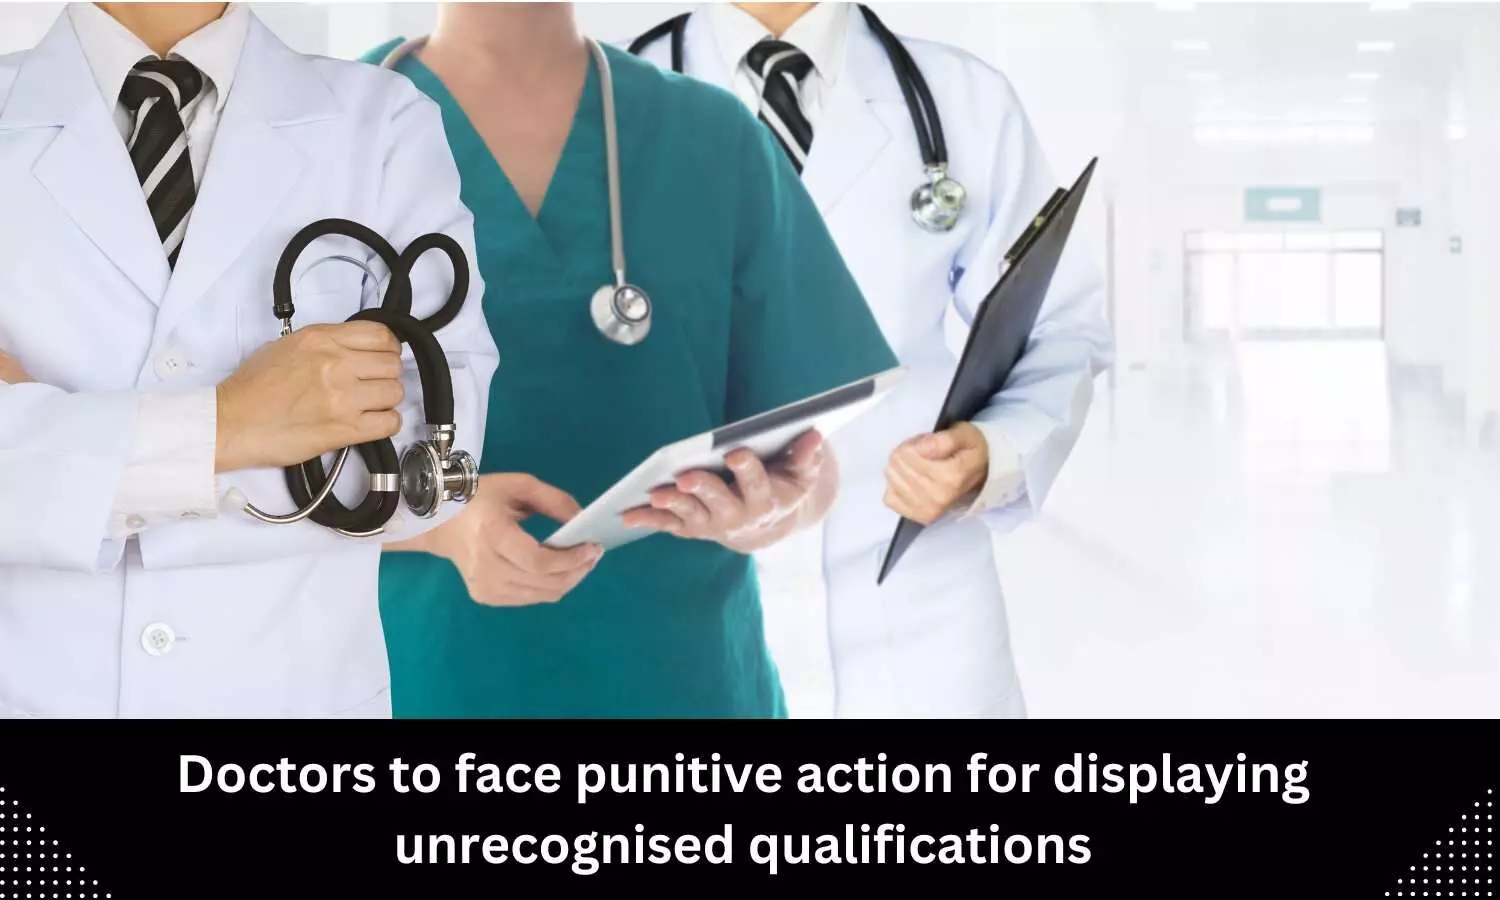 NMC Warning: Doctors to face punitive action for displaying unrecognised qualifications